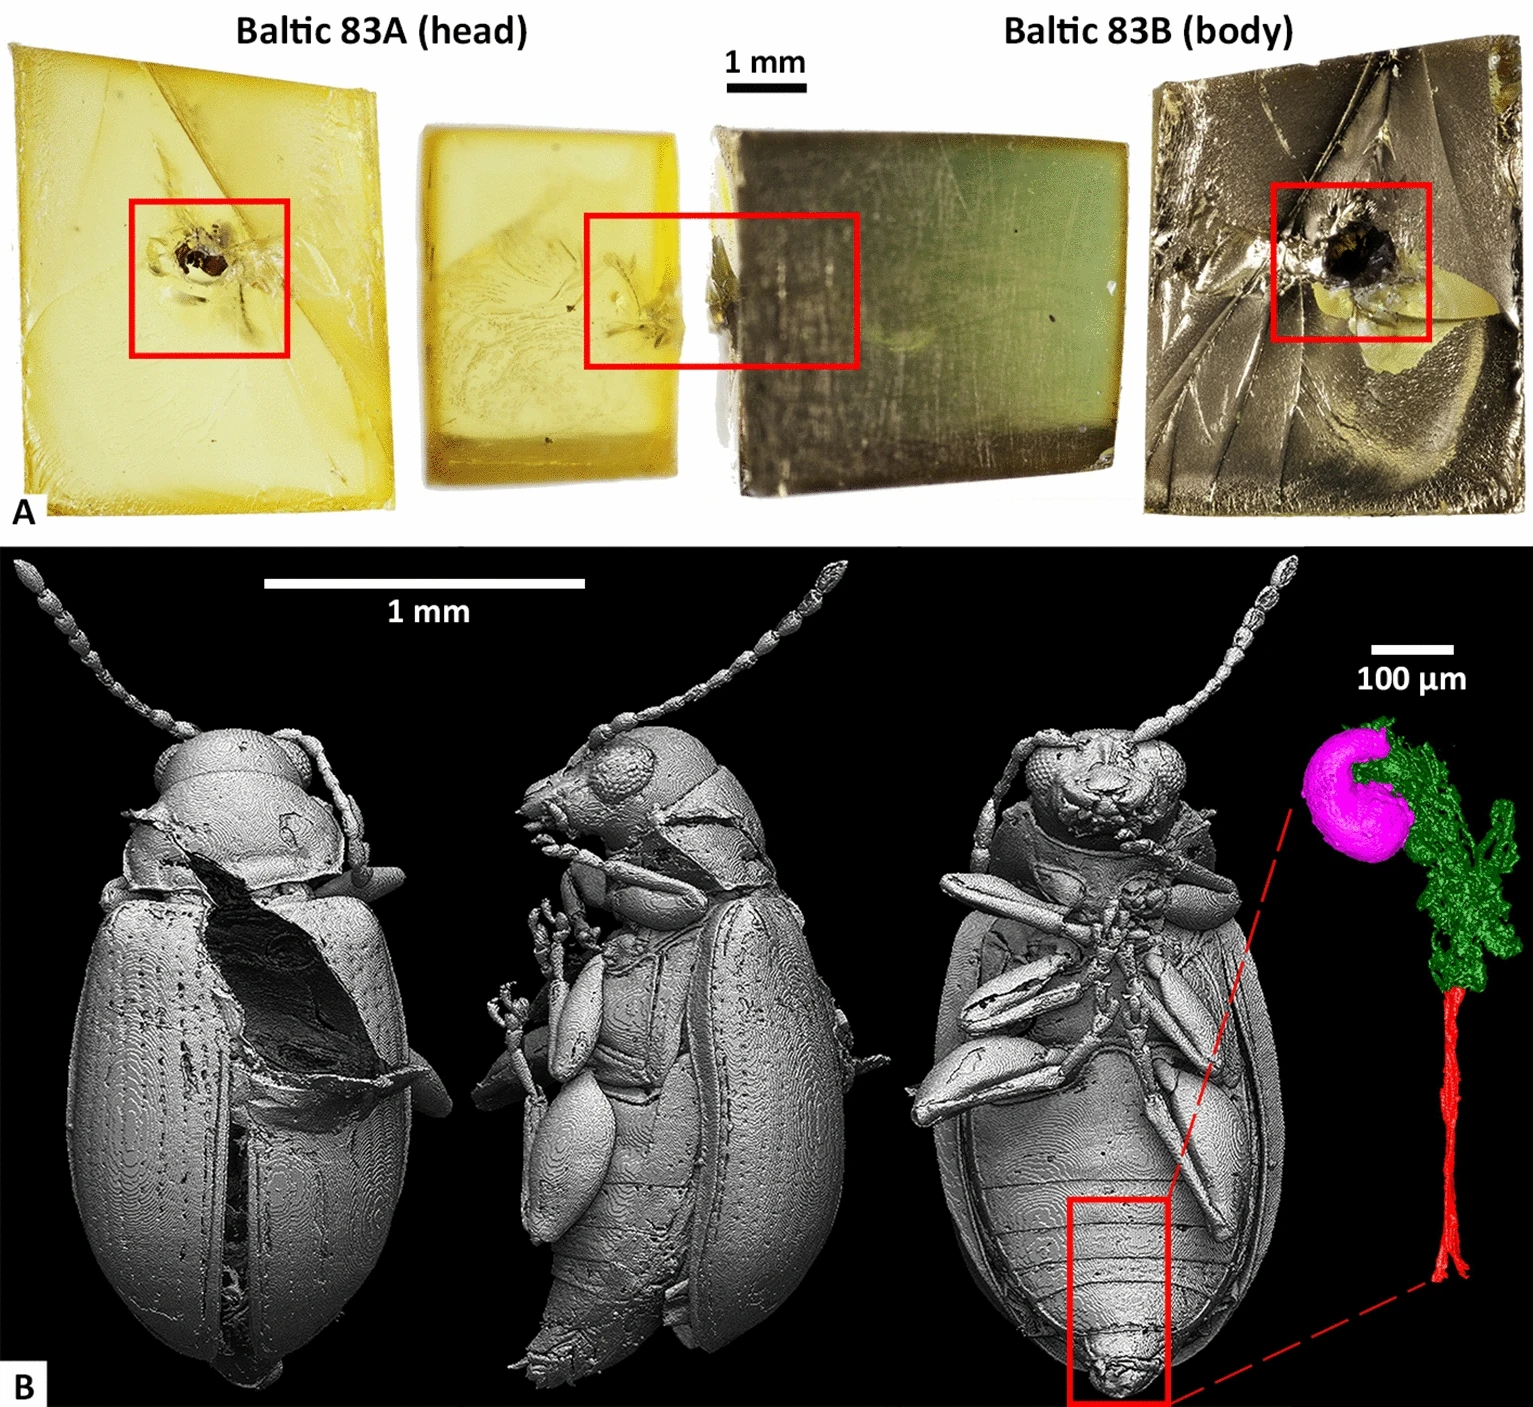 Photographs and 3D CT models of Baltic 83, a 44-million-year-old beetle trapped in amber. The piece of amber was cracked open, splitting the beetle in half. Excellent preservation allows a life-like reconstruction of the insect such that even internal soft tissues, such as the genitalia (bottom right), are preserved. (Visuals provided by research team)